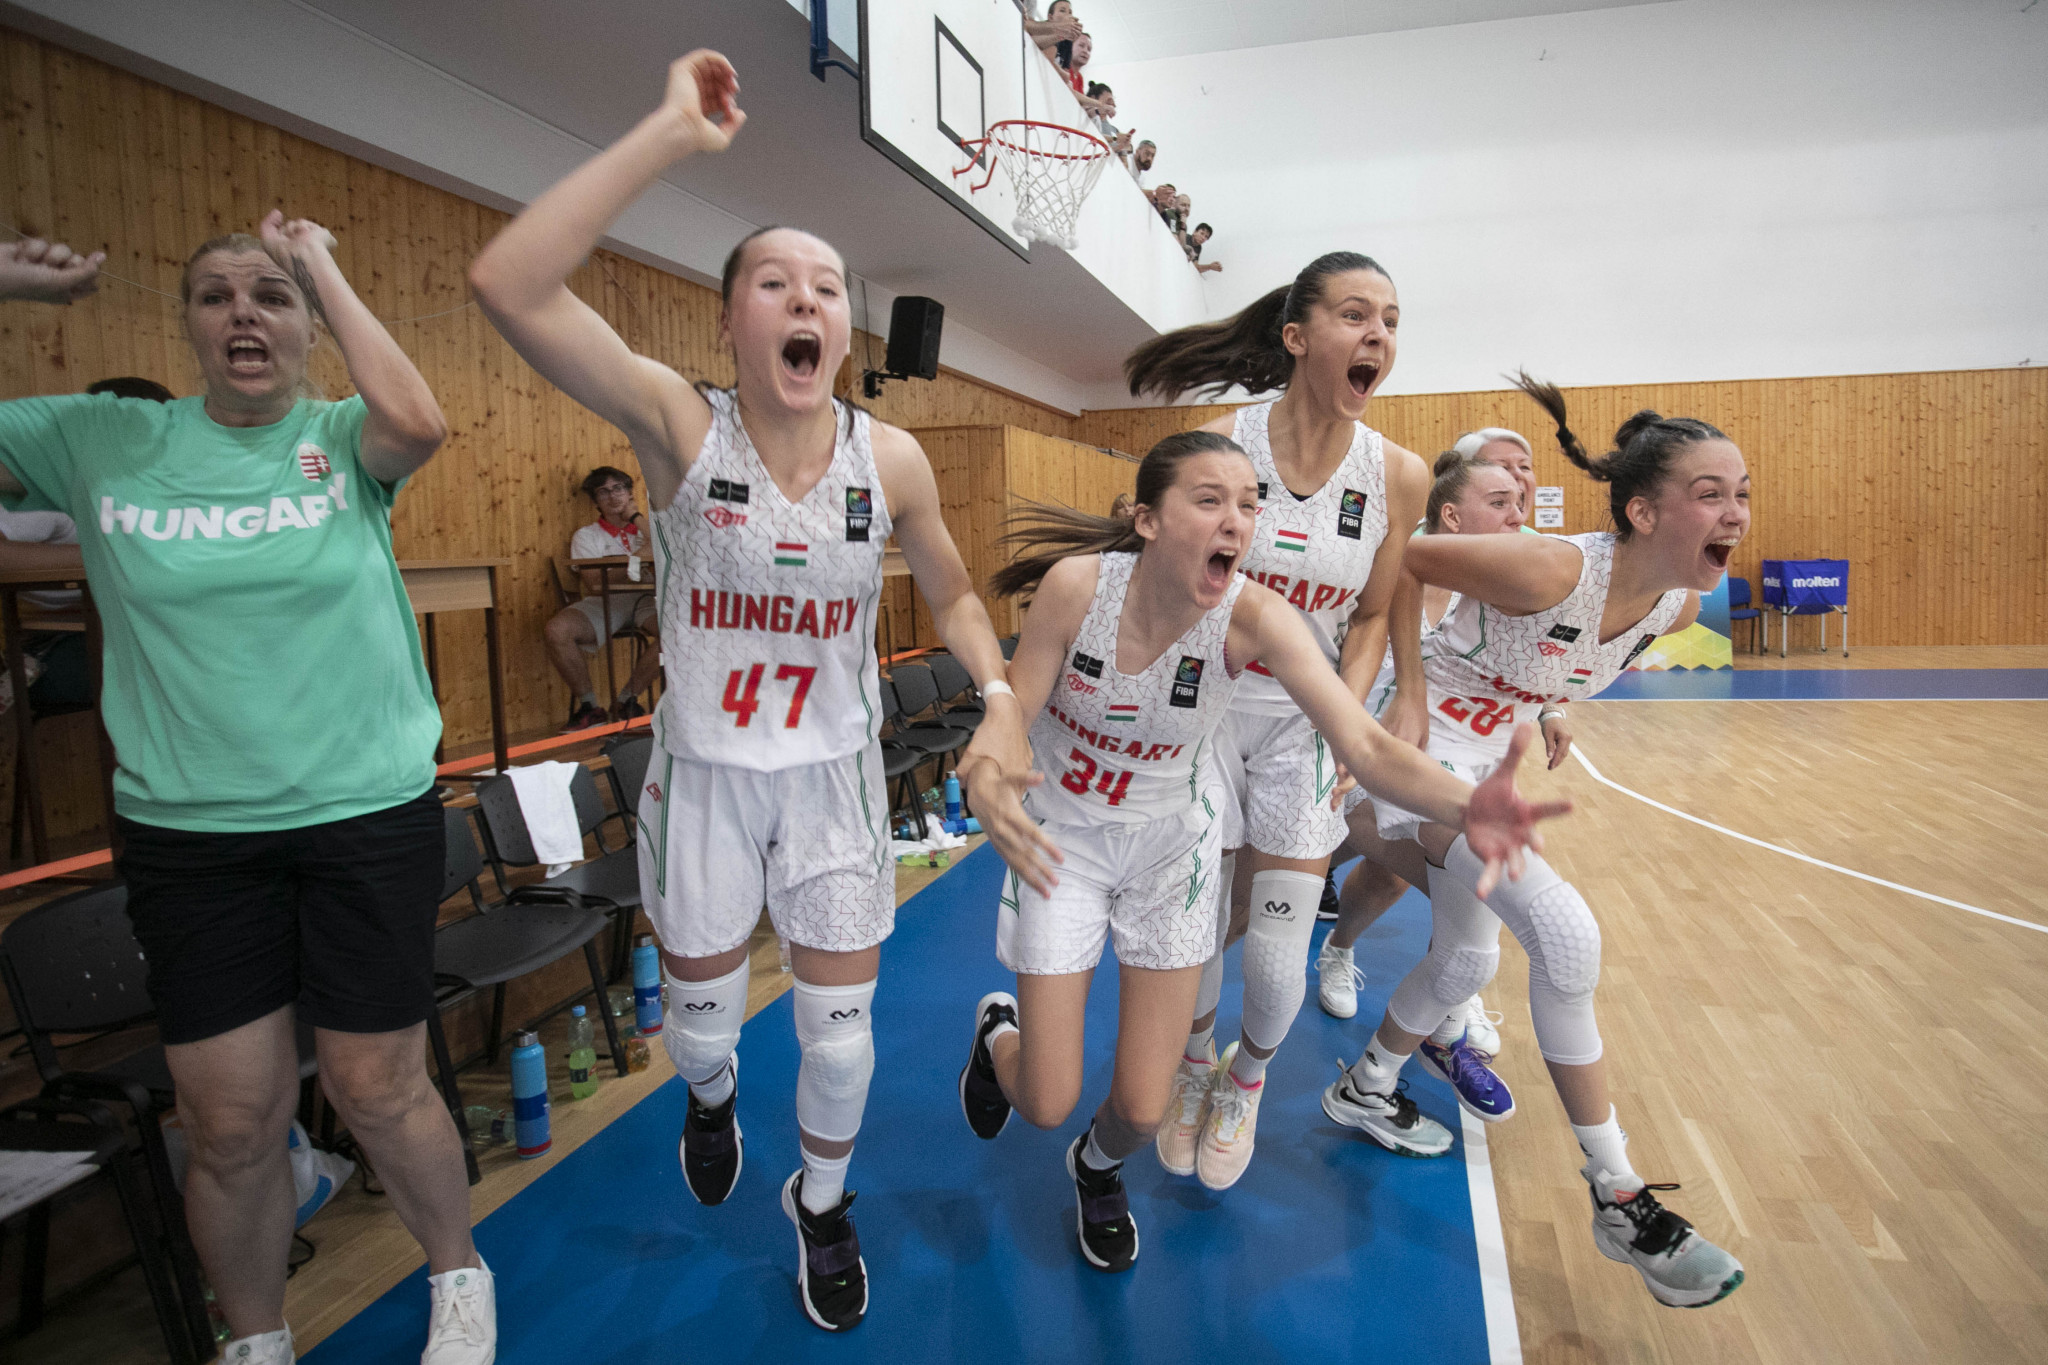 Hungary got the better of Slovenia 59-52 in a 
thrilling encounter in the girls' basketball tournament ©EYOF Banská Bystrica 2022